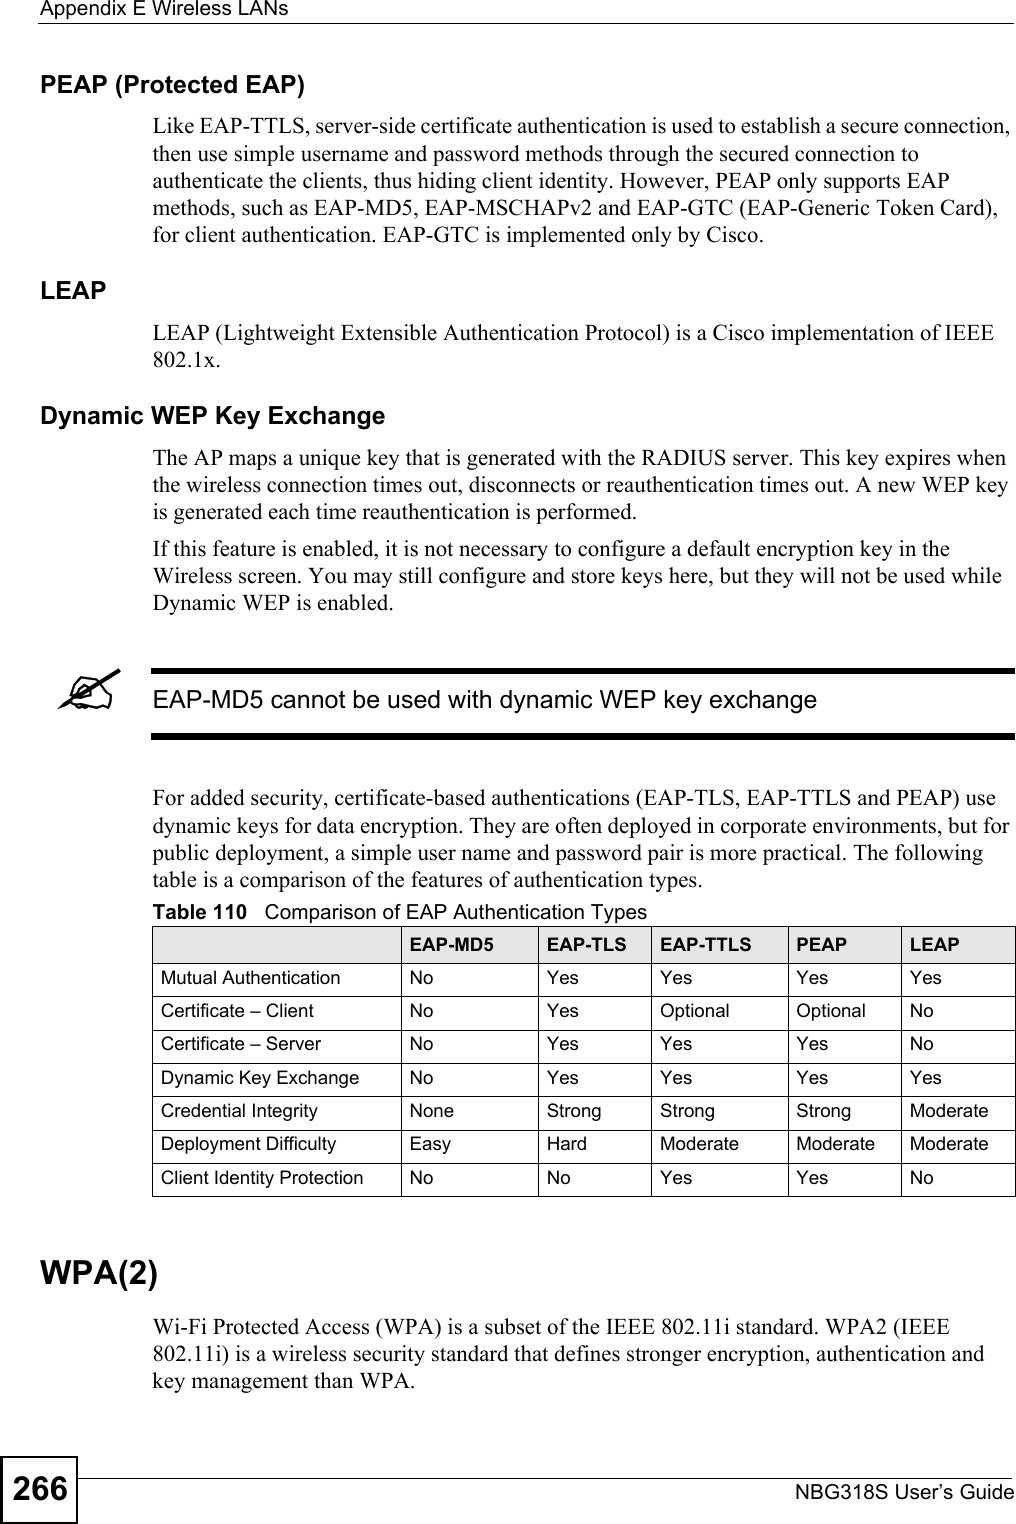 Appendix E Wireless LANsNBG318S User’s Guide266PEAP (Protected EAP)   Like EAP-TTLS, server-side certificate authentication is used to establish a secure connection, then use simple username and password methods through the secured connection to authenticate the clients, thus hiding client identity. However, PEAP only supports EAP methods, such as EAP-MD5, EAP-MSCHAPv2 and EAP-GTC (EAP-Generic Token Card), for client authentication. EAP-GTC is implemented only by Cisco.LEAPLEAP (Lightweight Extensible Authentication Protocol) is a Cisco implementation of IEEE 802.1x. Dynamic WEP Key ExchangeThe AP maps a unique key that is generated with the RADIUS server. This key expires when the wireless connection times out, disconnects or reauthentication times out. A new WEP key is generated each time reauthentication is performed.If this feature is enabled, it is not necessary to configure a default encryption key in the Wireless screen. You may still configure and store keys here, but they will not be used while Dynamic WEP is enabled.&quot;EAP-MD5 cannot be used with dynamic WEP key exchangeFor added security, certificate-based authentications (EAP-TLS, EAP-TTLS and PEAP) use dynamic keys for data encryption. They are often deployed in corporate environments, but for public deployment, a simple user name and password pair is more practical. The following table is a comparison of the features of authentication types.WPA(2)Wi-Fi Protected Access (WPA) is a subset of the IEEE 802.11i standard. WPA2 (IEEE 802.11i) is a wireless security standard that defines stronger encryption, authentication and key management than WPA. Table 110   Comparison of EAP Authentication TypesEAP-MD5 EAP-TLS EAP-TTLS PEAP LEAPMutual Authentication No Yes Yes Yes YesCertificate – Client No Yes Optional Optional NoCertificate – Server No Yes Yes Yes NoDynamic Key Exchange No Yes Yes Yes YesCredential Integrity None Strong Strong Strong ModerateDeployment Difficulty Easy Hard Moderate Moderate ModerateClient Identity Protection No No Yes Yes No